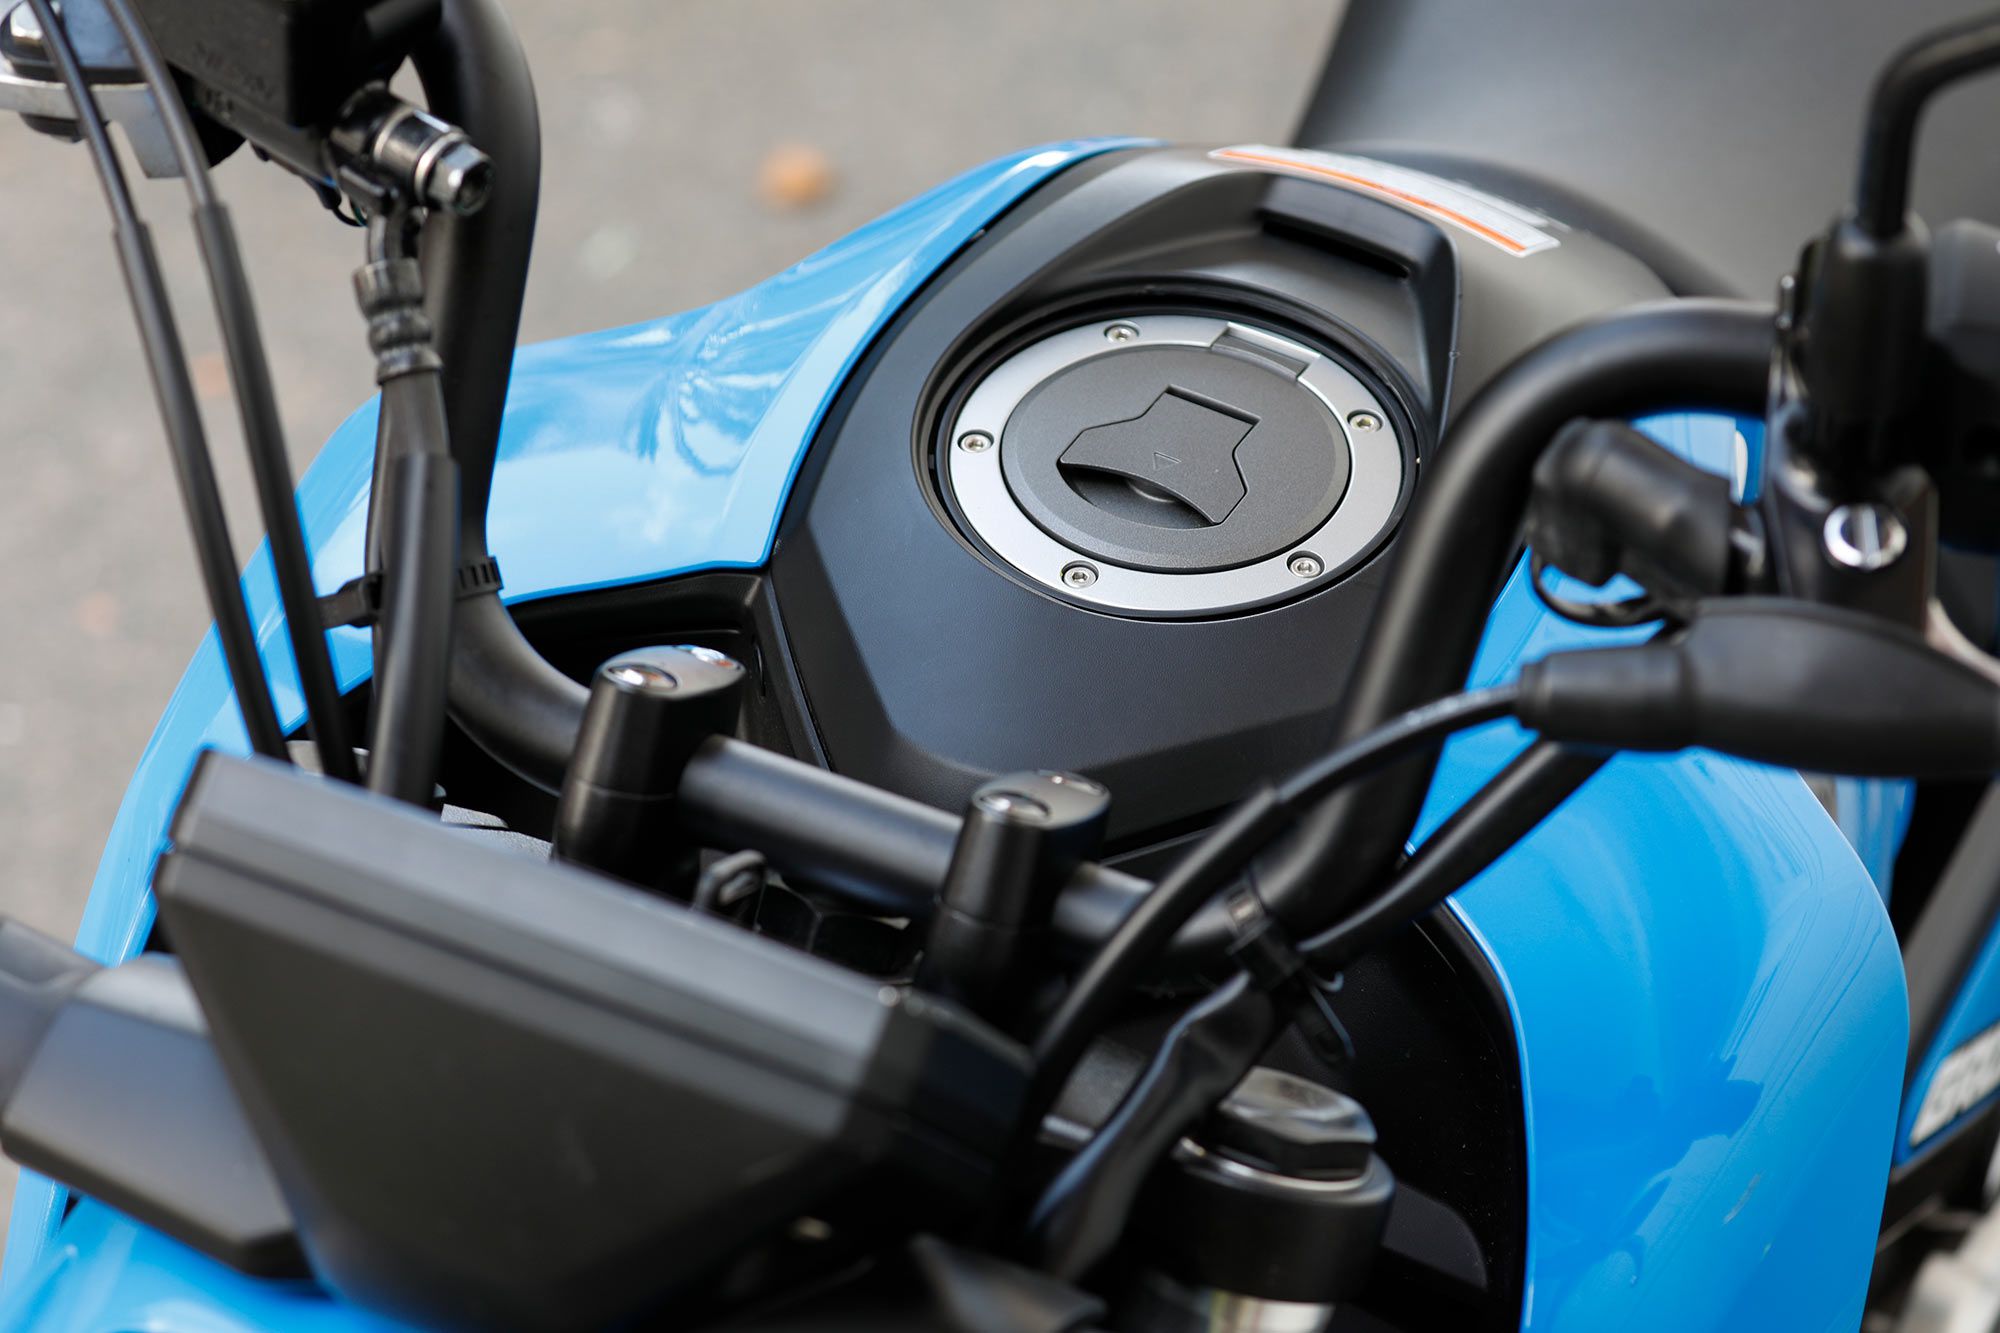 Honda’s Grom adds 0.67 quart of fuel capacity. We measured nearly 98 mpg during the course of our urban riding.